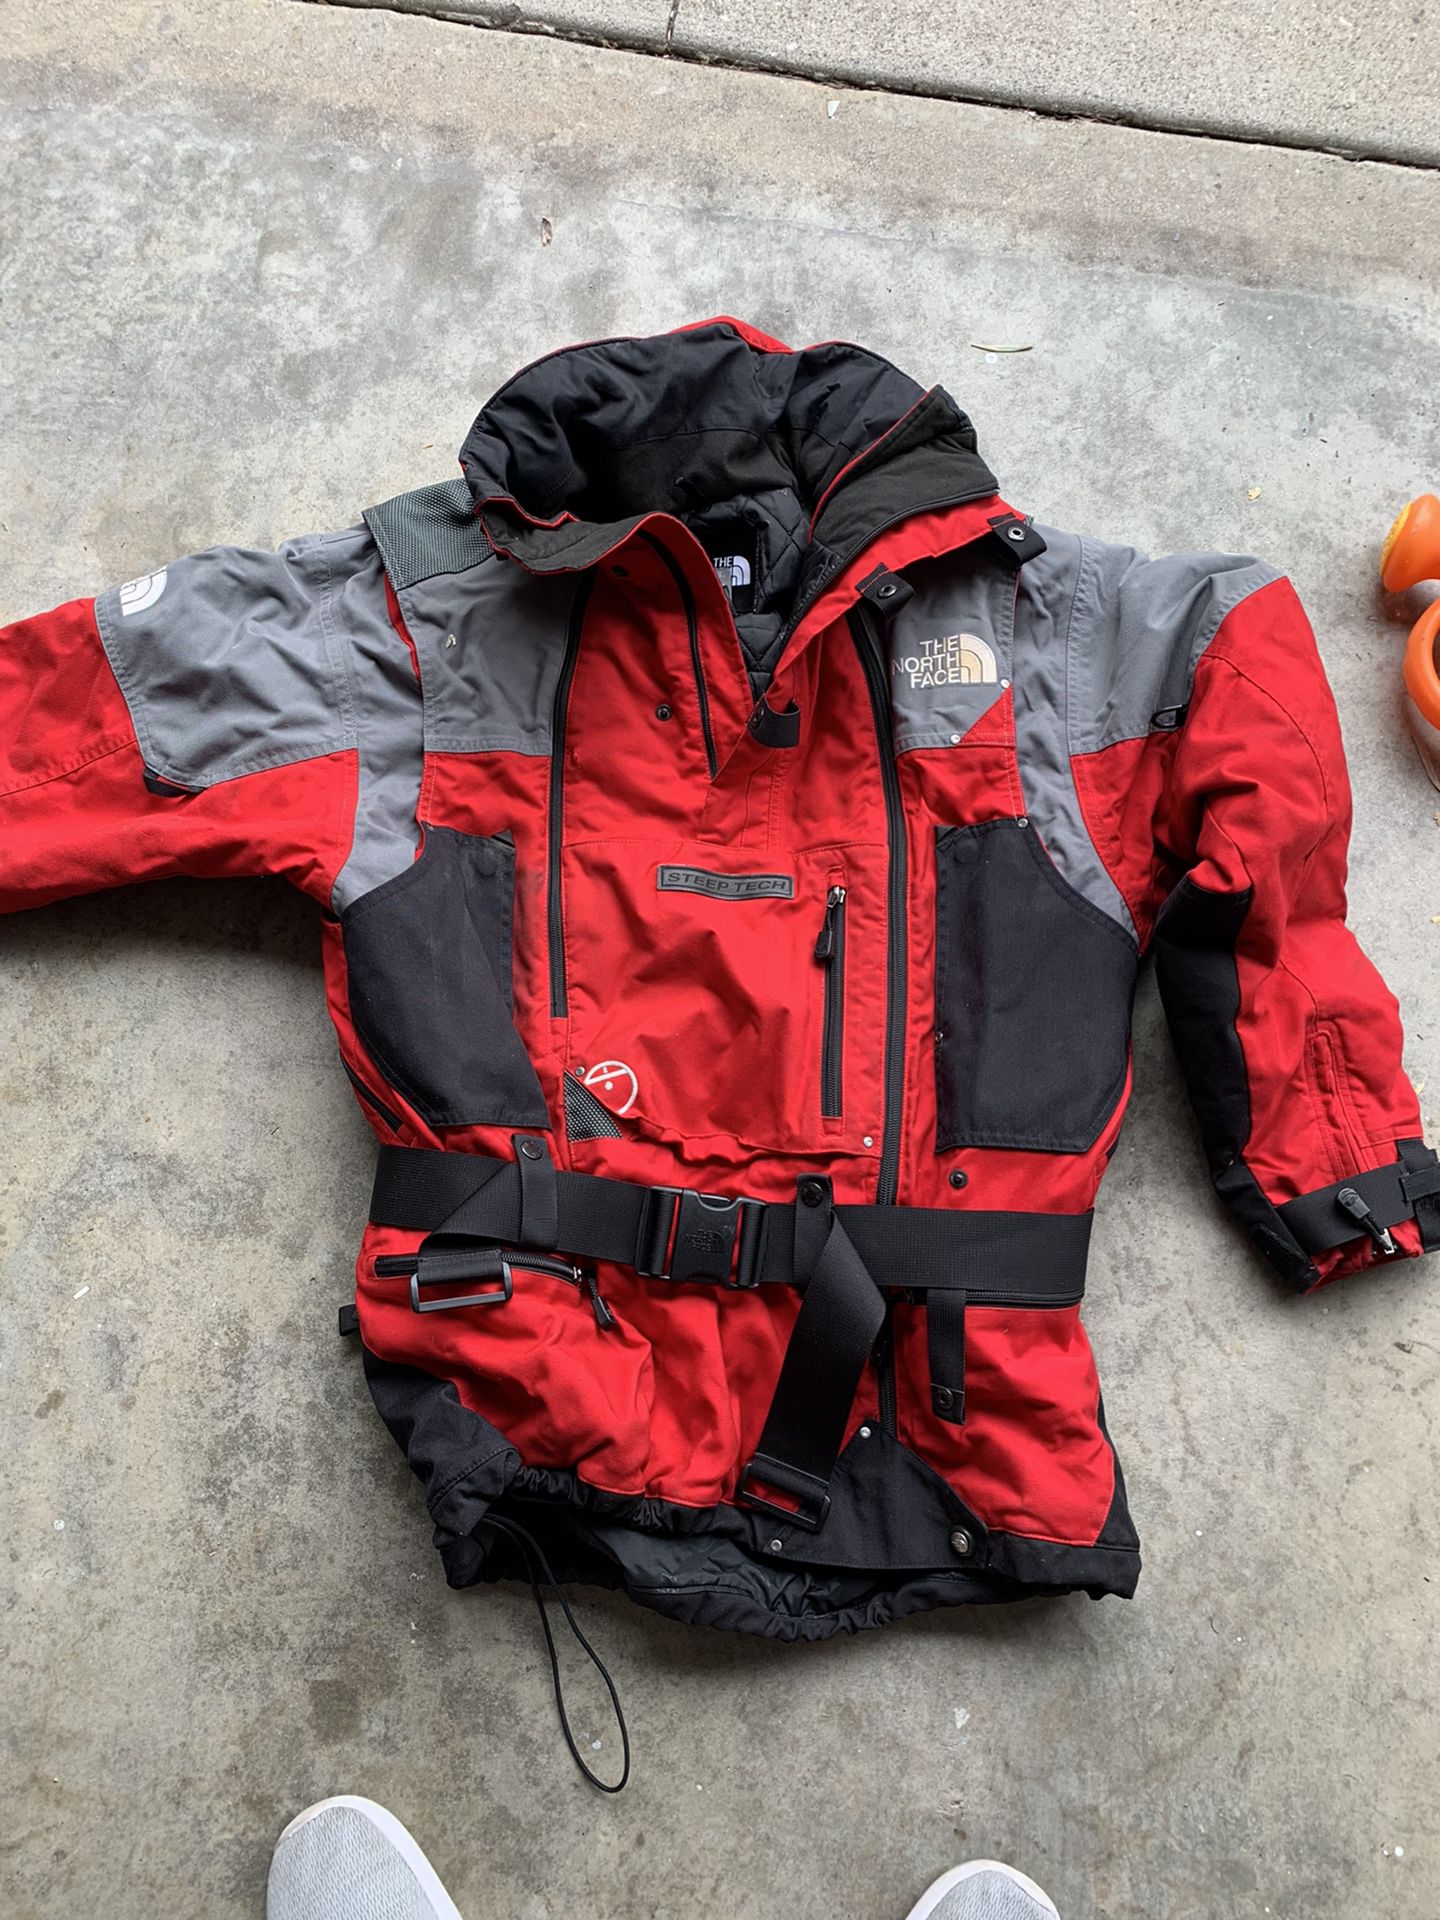 90s The North Face Steep Tech Scot Schmidt Red Grey Jacket for Sale in West  Covina, CA - OfferUp